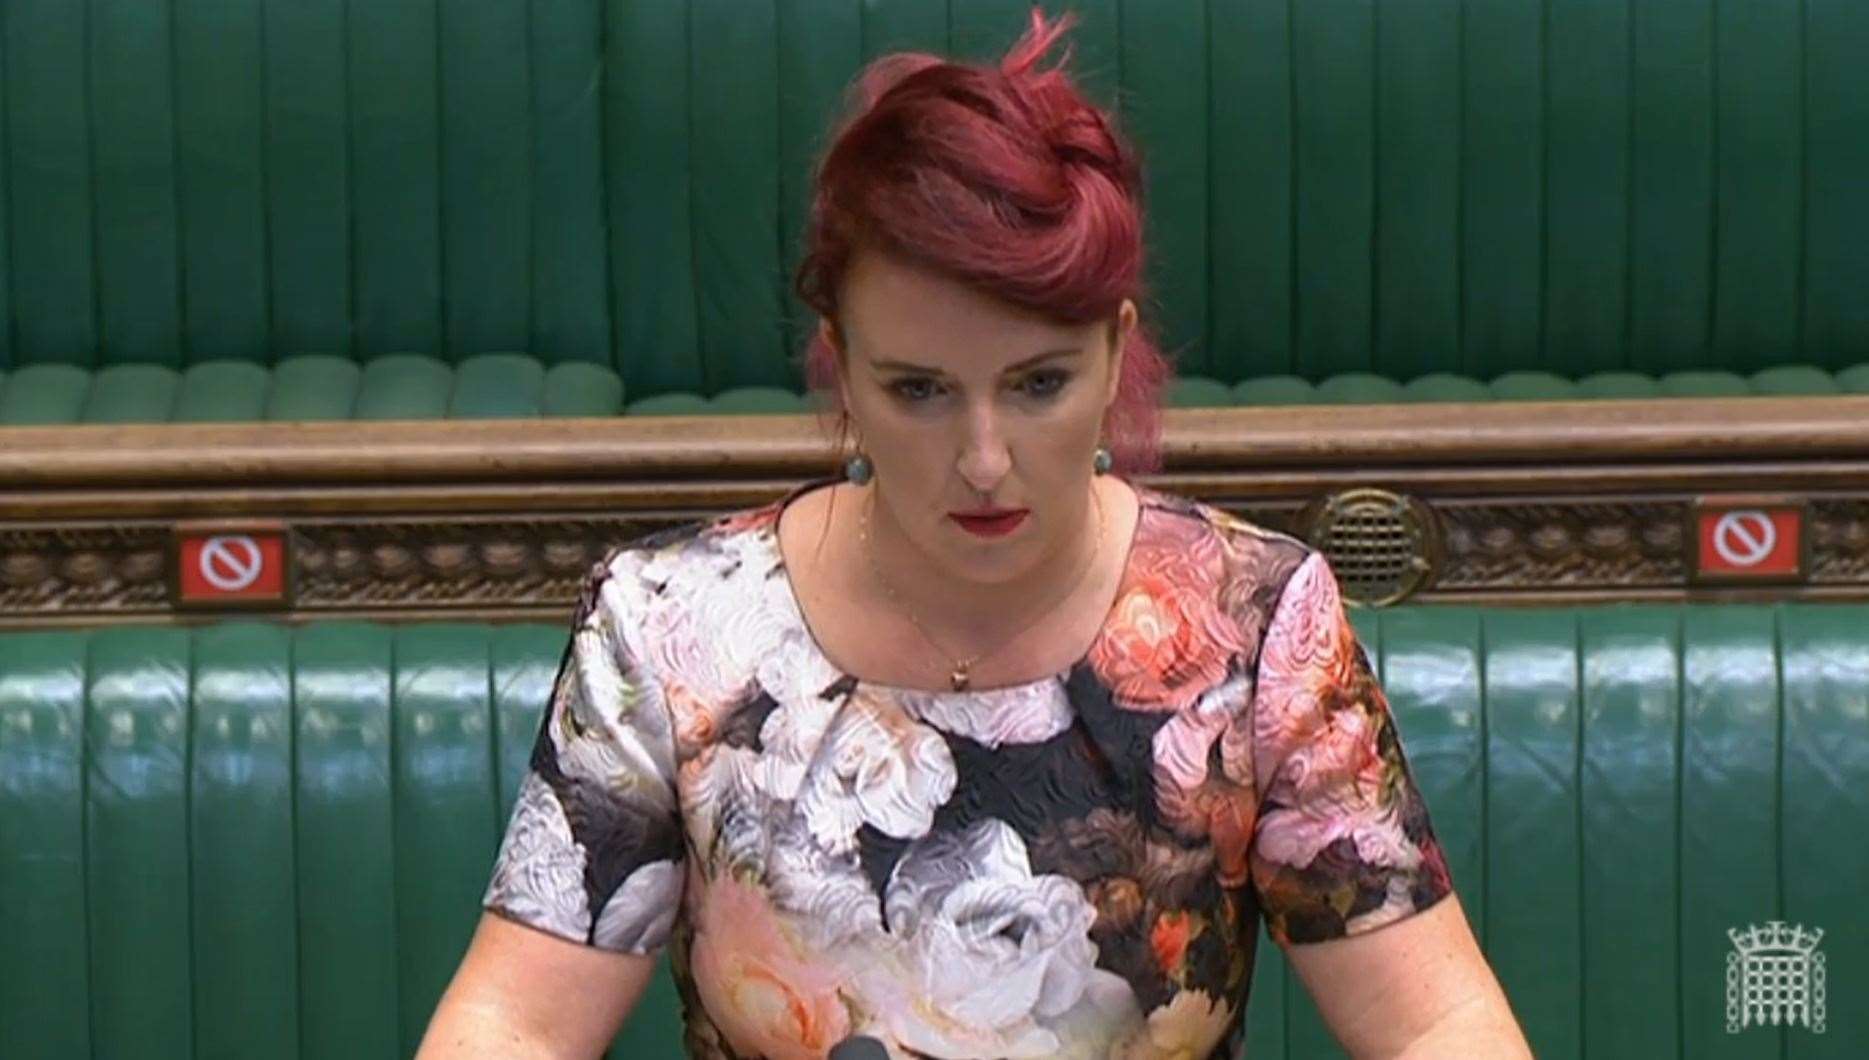 Louise Haigh hit out over the reasons given for delaying HS2 (House of Commons/PA)